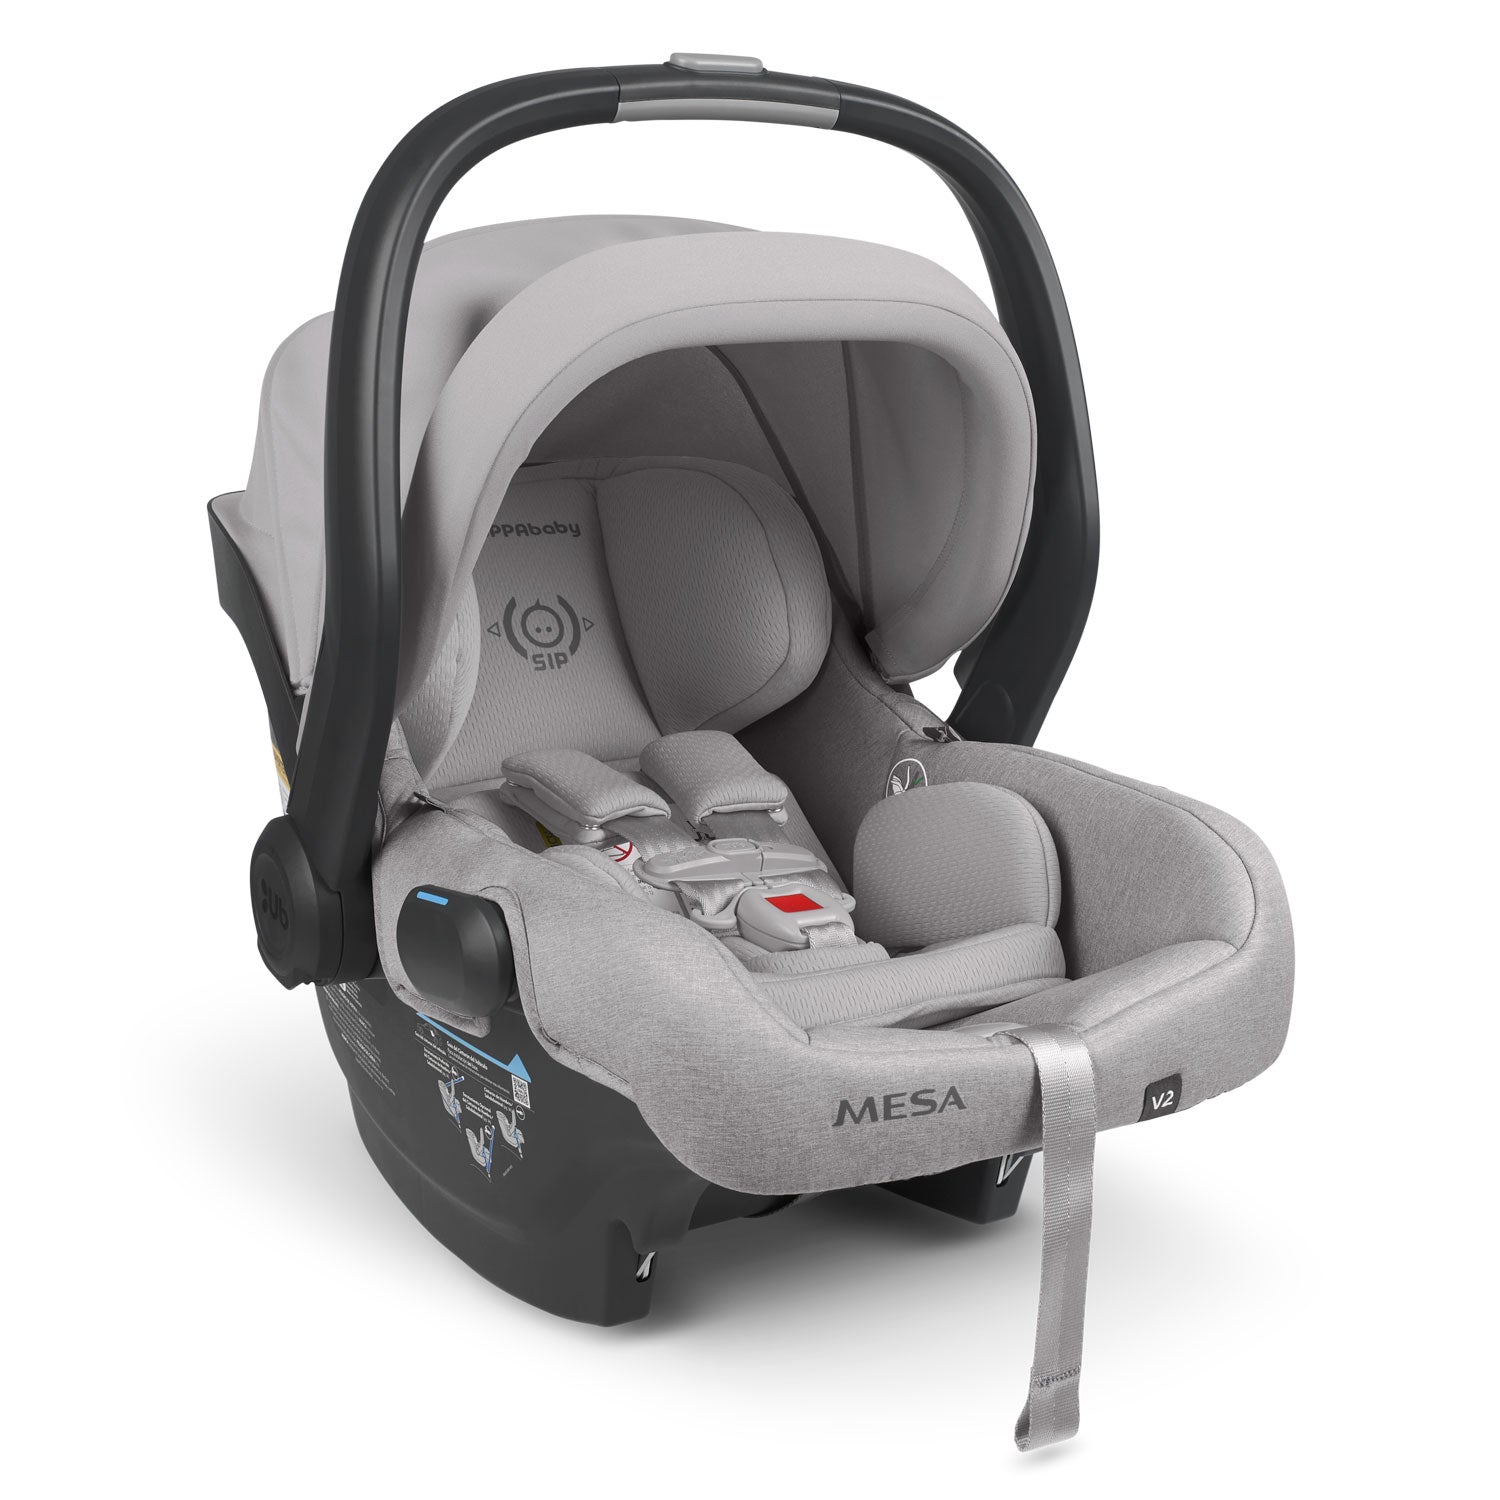 UPPAbaby MESA V2 Infant Car Seat | The Baby Cubby